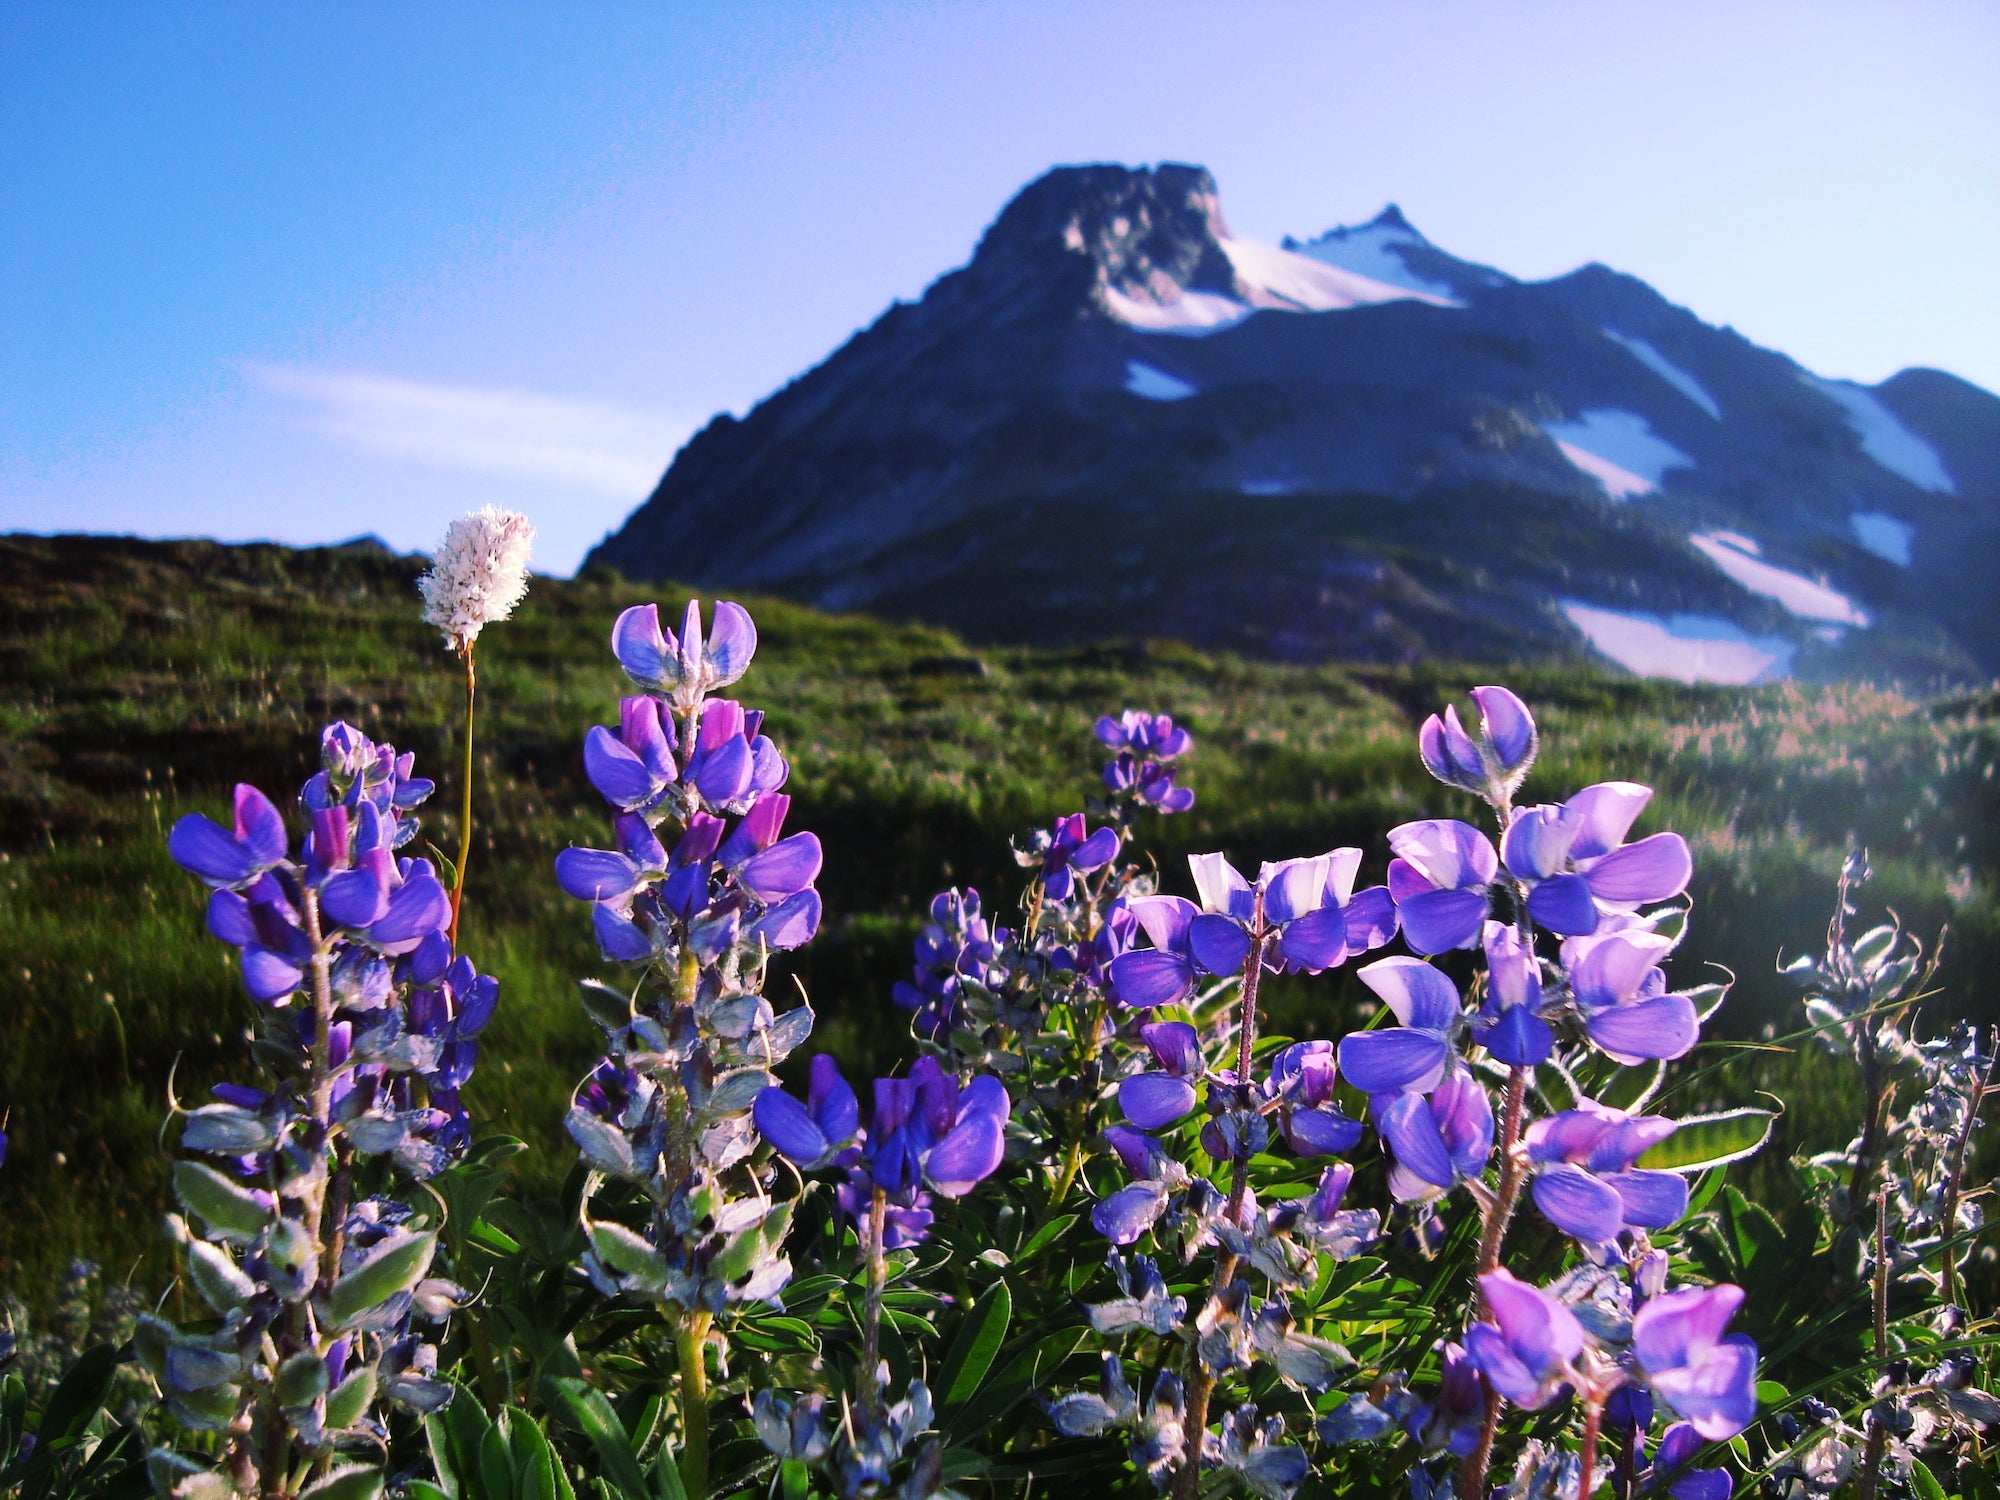 North Cascades National Park in Washington is known as the American Alps with purple wildflowers